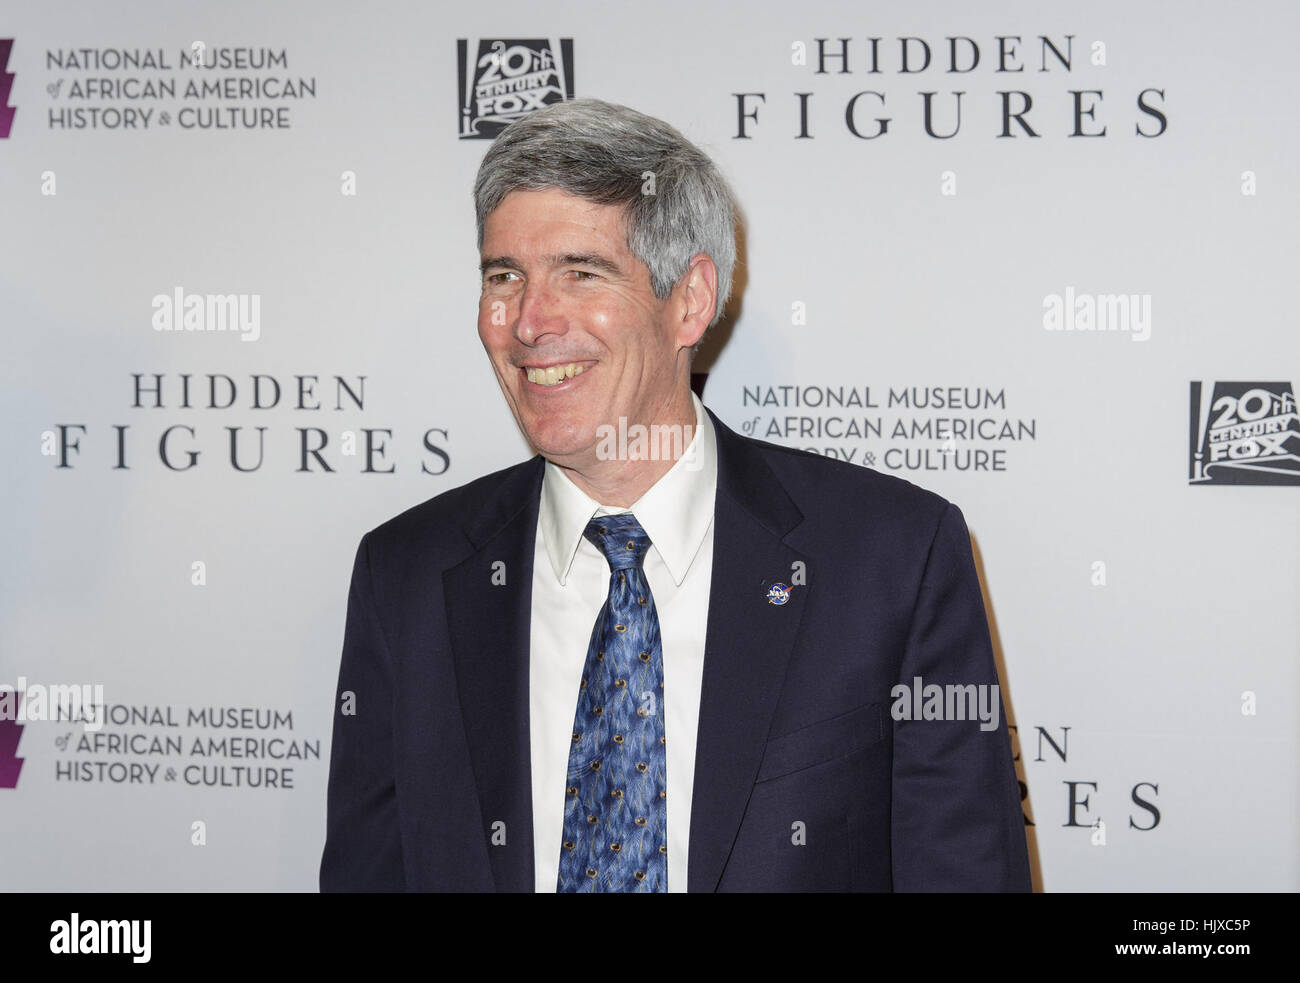 NASA Chief Historian Bill Barry arrives on the red carpet for a screening of the film “Hidden Figures” at the Smithsonian’s National Museum of African American History and Culture, Wednesday, Dec. 14, 2016 in Washington DC. The film is based on the book of the same title, by Margot Lee Shetterly, and chronicles the lives of Katherine Johnson, Dorothy Vaughan and Mary Jackson -- African-American women working at NASA as “human computers,” who were critical to the success of John Glenn’s Friendship 7 mission in 1962. Stock Photo